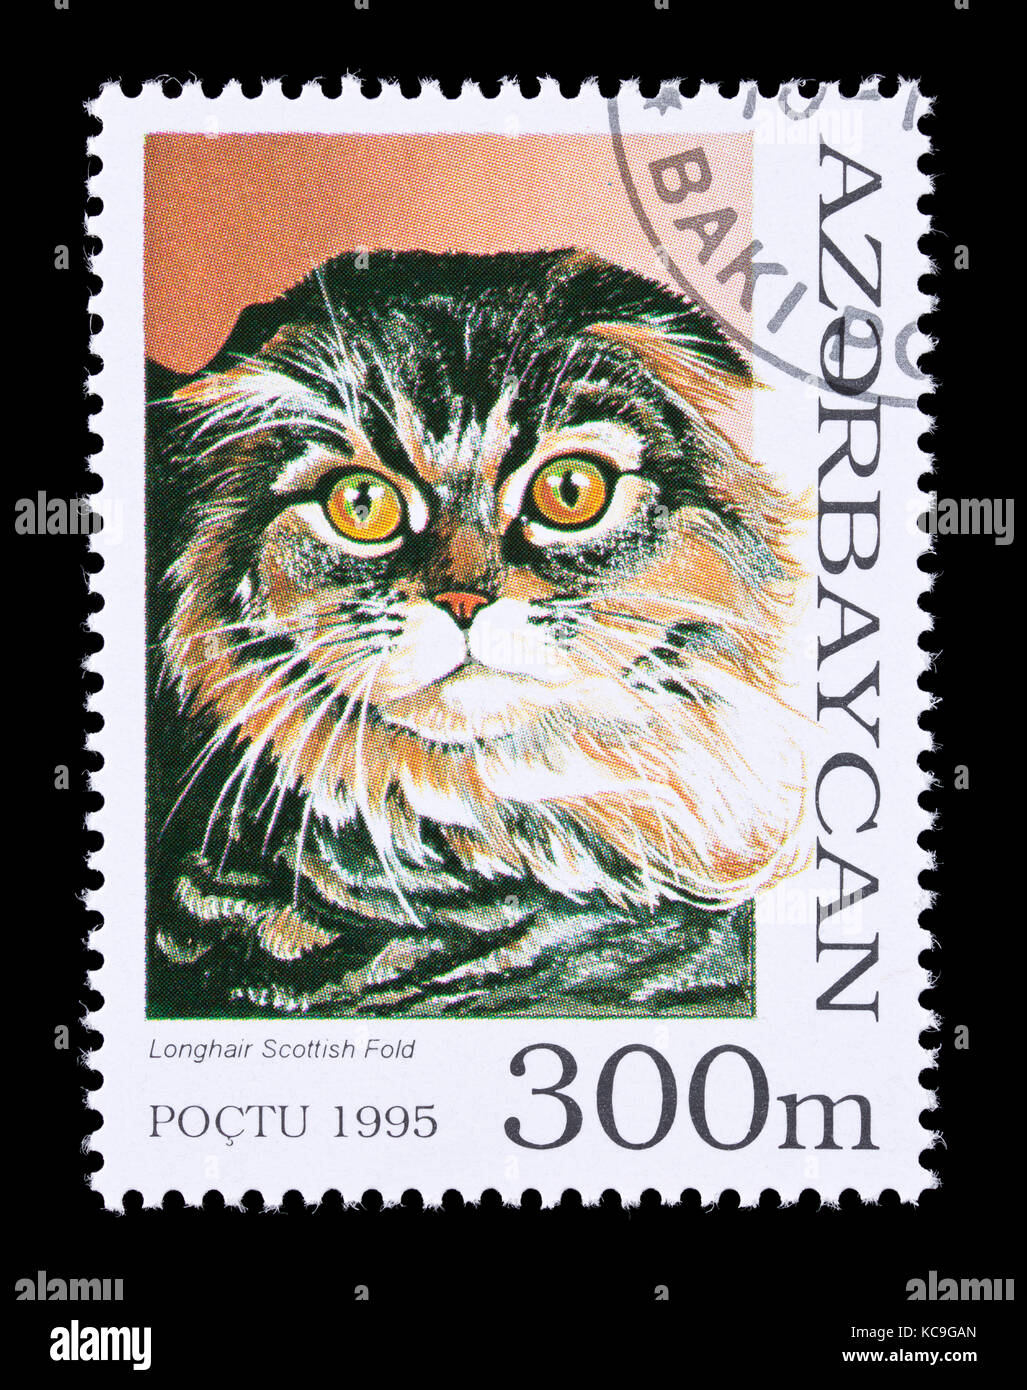 Postage stamp from Azerbaijan depicting a longhair Scottish fold breed of house cat. Stock Photo